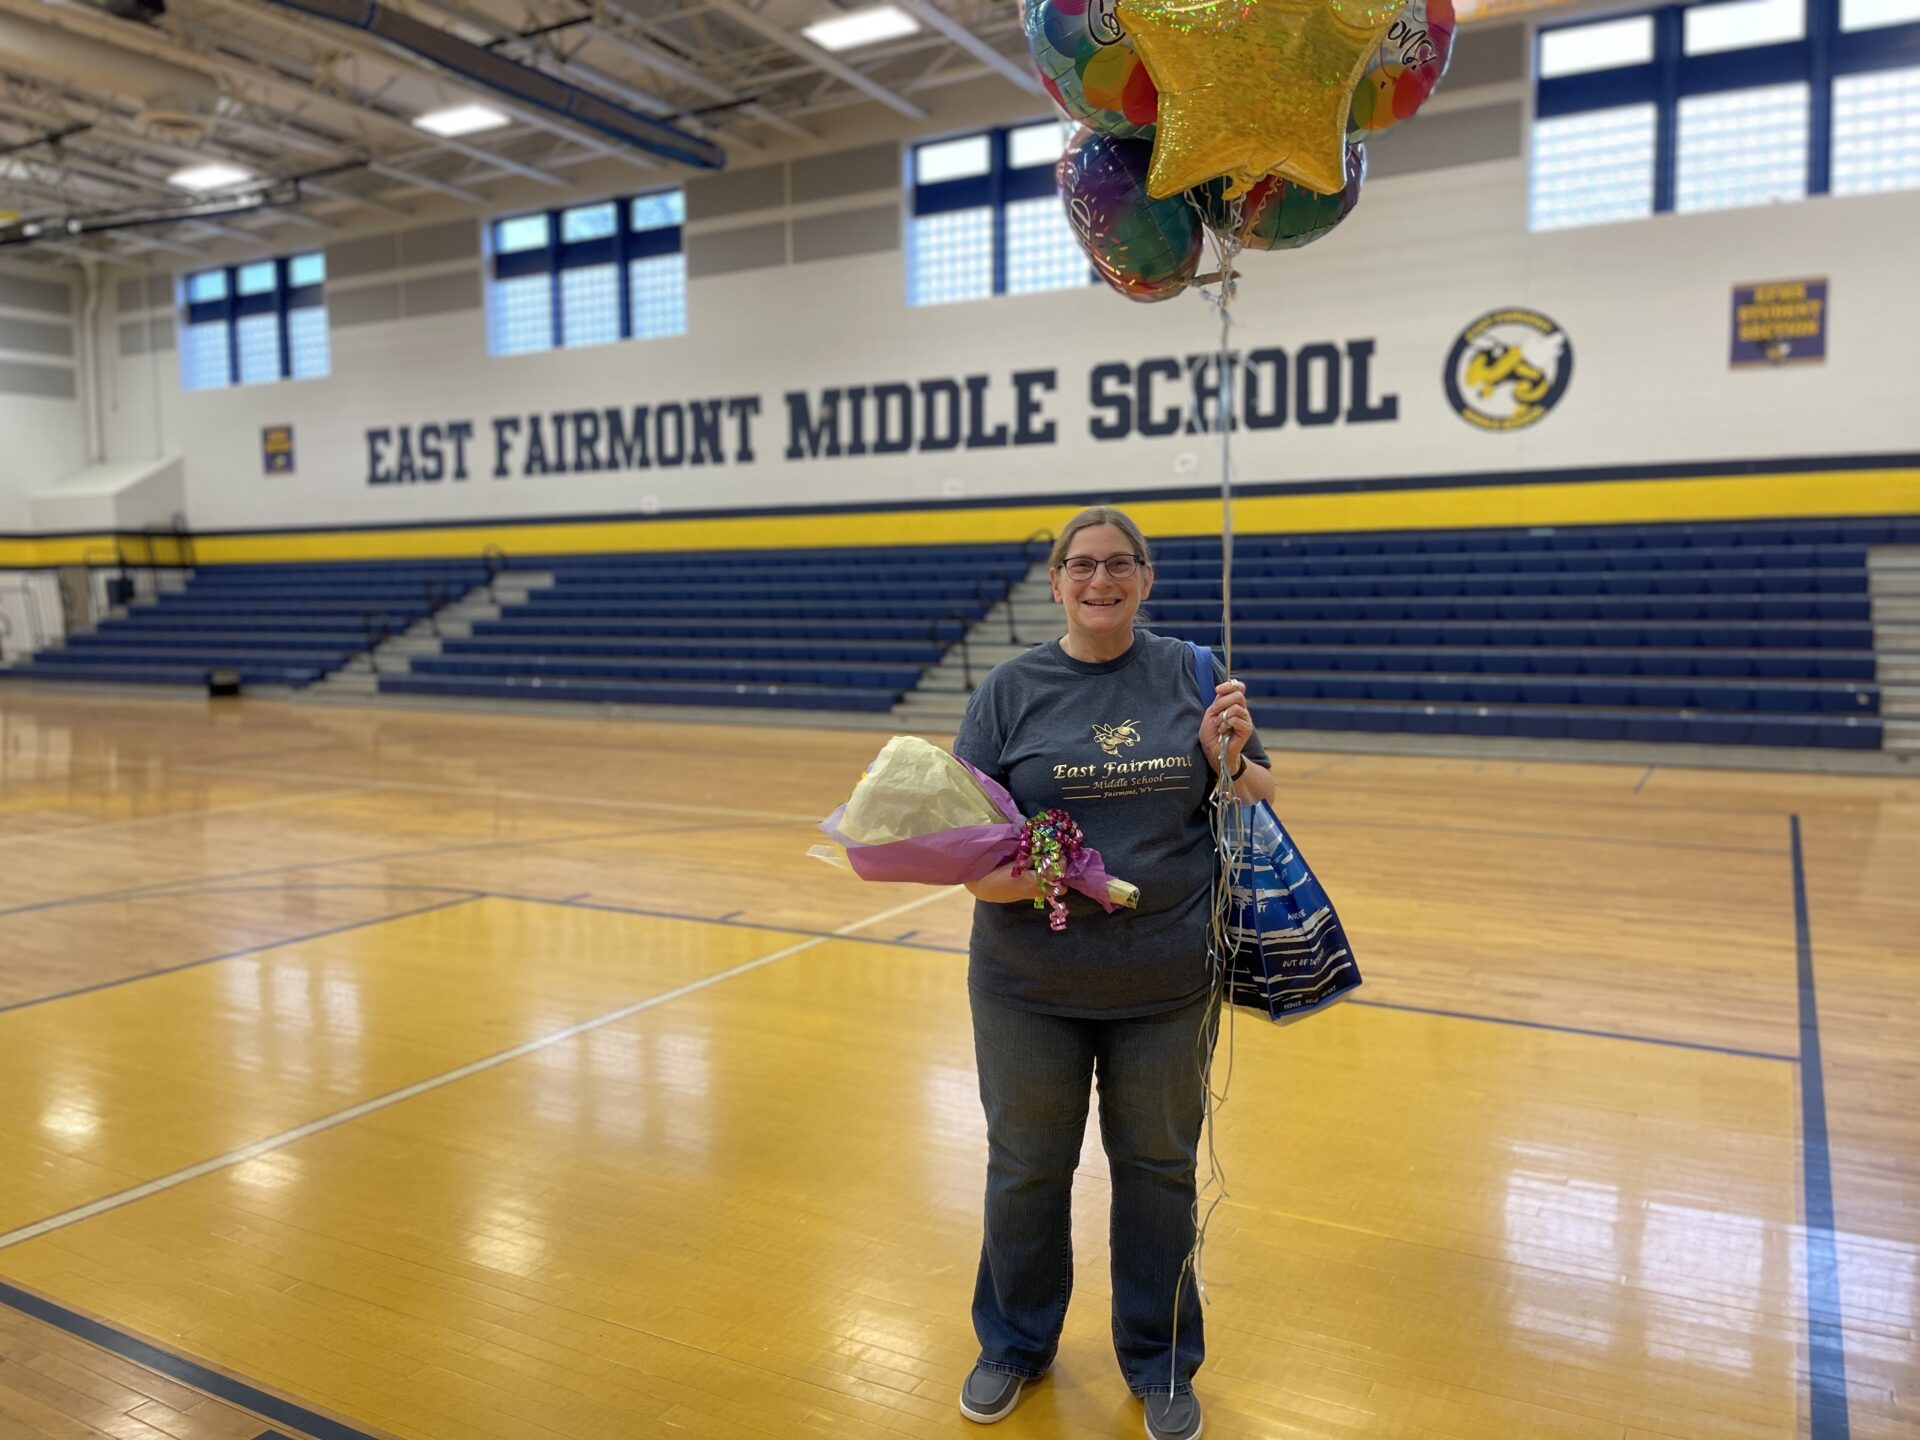 An older woman stands in the center of an empty school gymnasium. She holds a bouquet in one hand and a tote bag in the other. She is smiling for the camera, has her salt and pepper hair pulled back into a ponytail, and wears glasses.